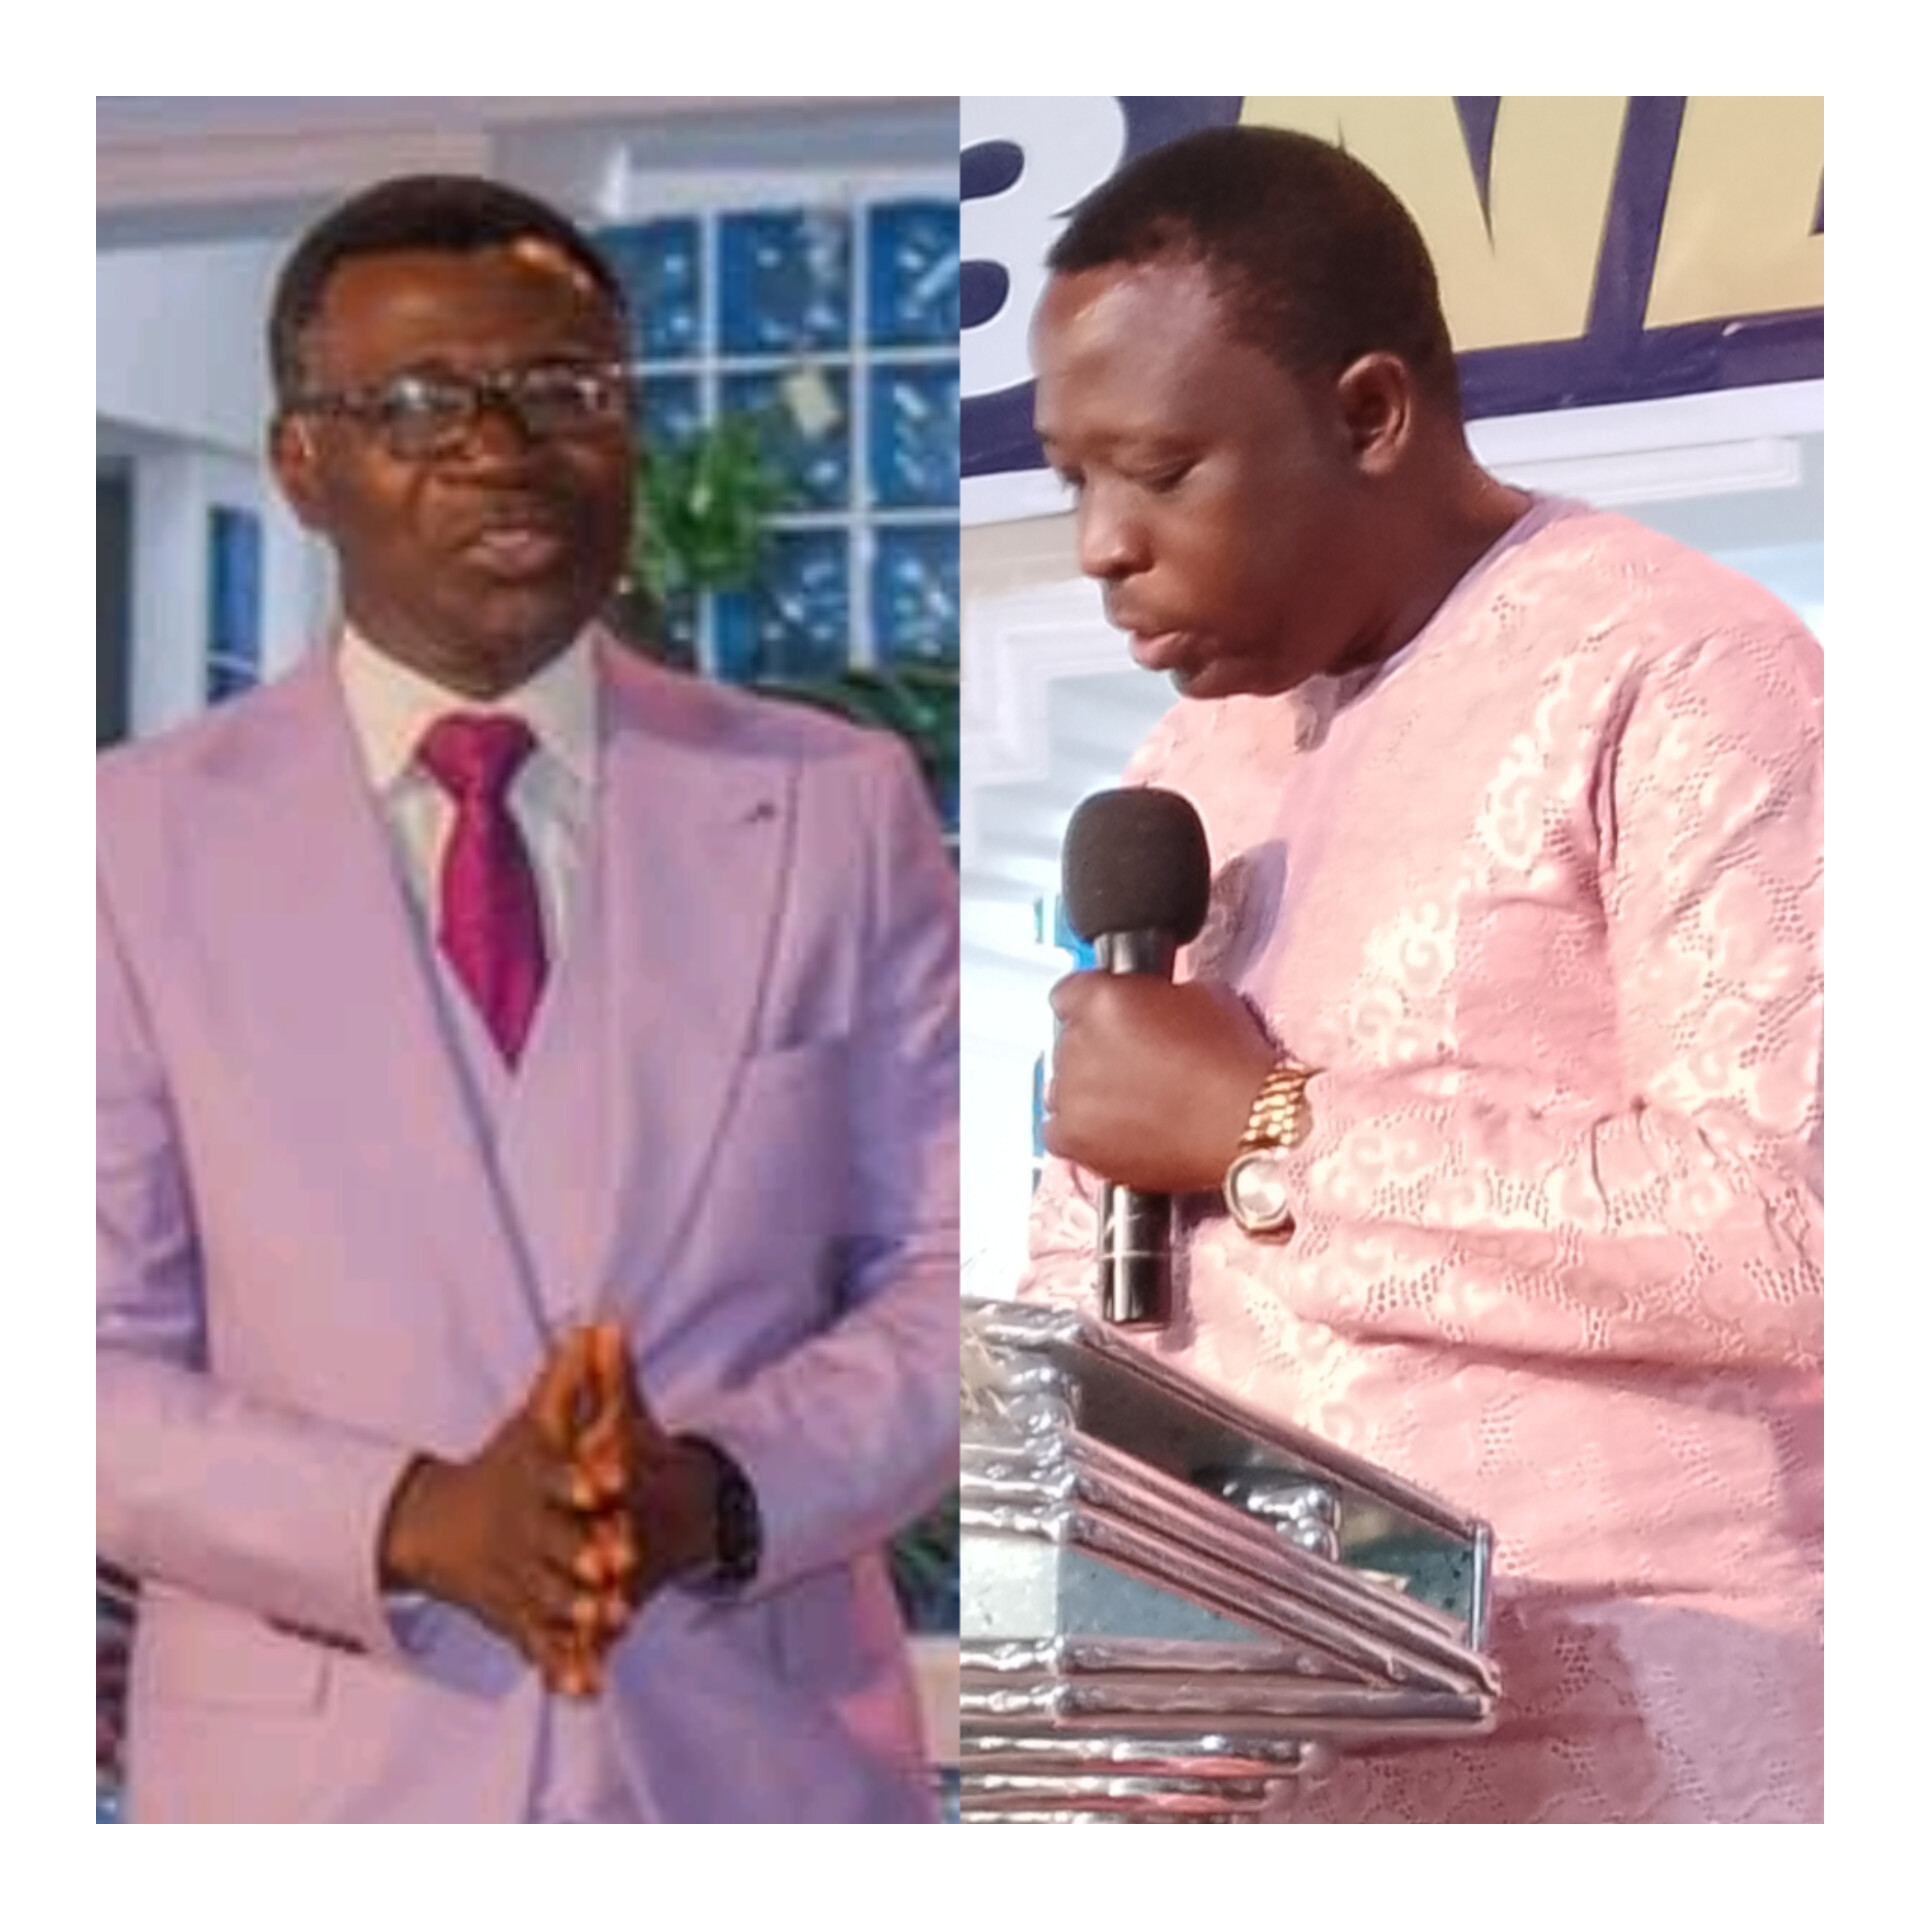 Always return to God with Heart of Gratitude, Rev’d Ayinde Charges Nigerians  … As NMA Boss expresses worries over poor welfare package, seeks Govt intervention